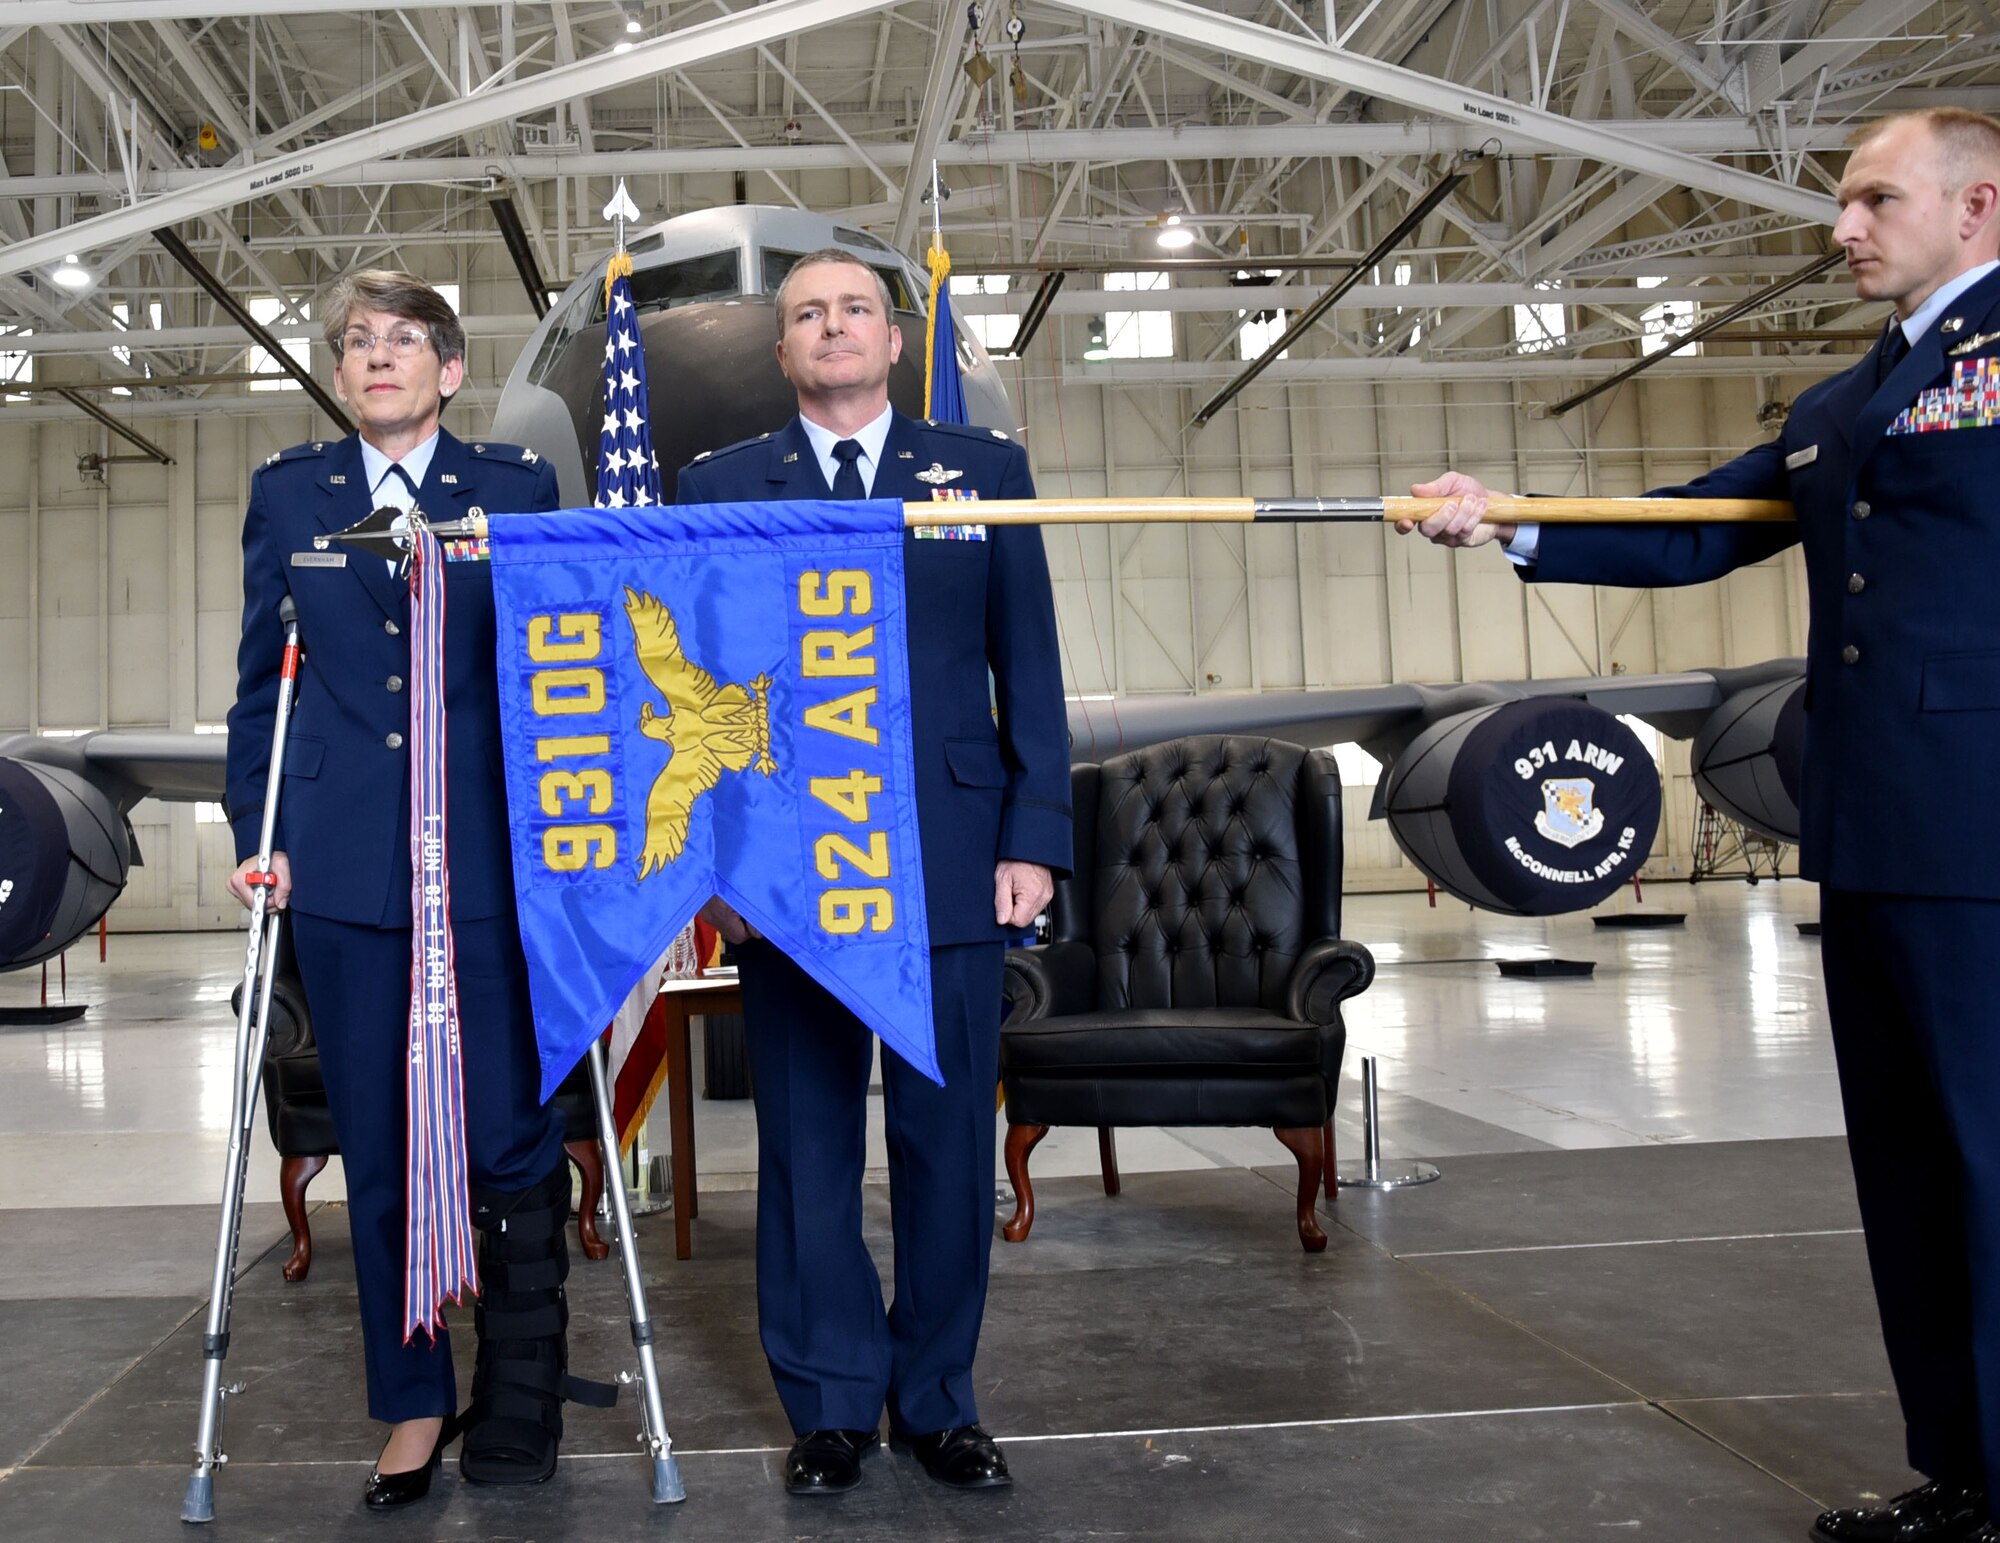 (Left to right) Col. Caroline Evernham, 931st Operations Group commander, Lt. Col. Terry McGee, incoming 924th Air Refueling Squadron commander, and Senior Master Sgt. Jay Guldjord, 18th Air Refueling Squadron boom operator, unfurl the flag signifying the standup of the 924th Air Refueling Squadron April 2, 2017, McConnell Air Force Base, Kan.  The 924th Air Refueling Squadron was last assigned to the 93rd Operations Group at Castle Air Force Base, Calif.  The unit was inactivated April 30, 1992. The 924 ARS at McConnell is the first unit in the Air Force dedicated solely to the KC-46A Pegasus.  The KC-46 is scheduled to arrive later this year.  (U.S. Air Force photo by Tech. Sgt. Abigail Klein)
